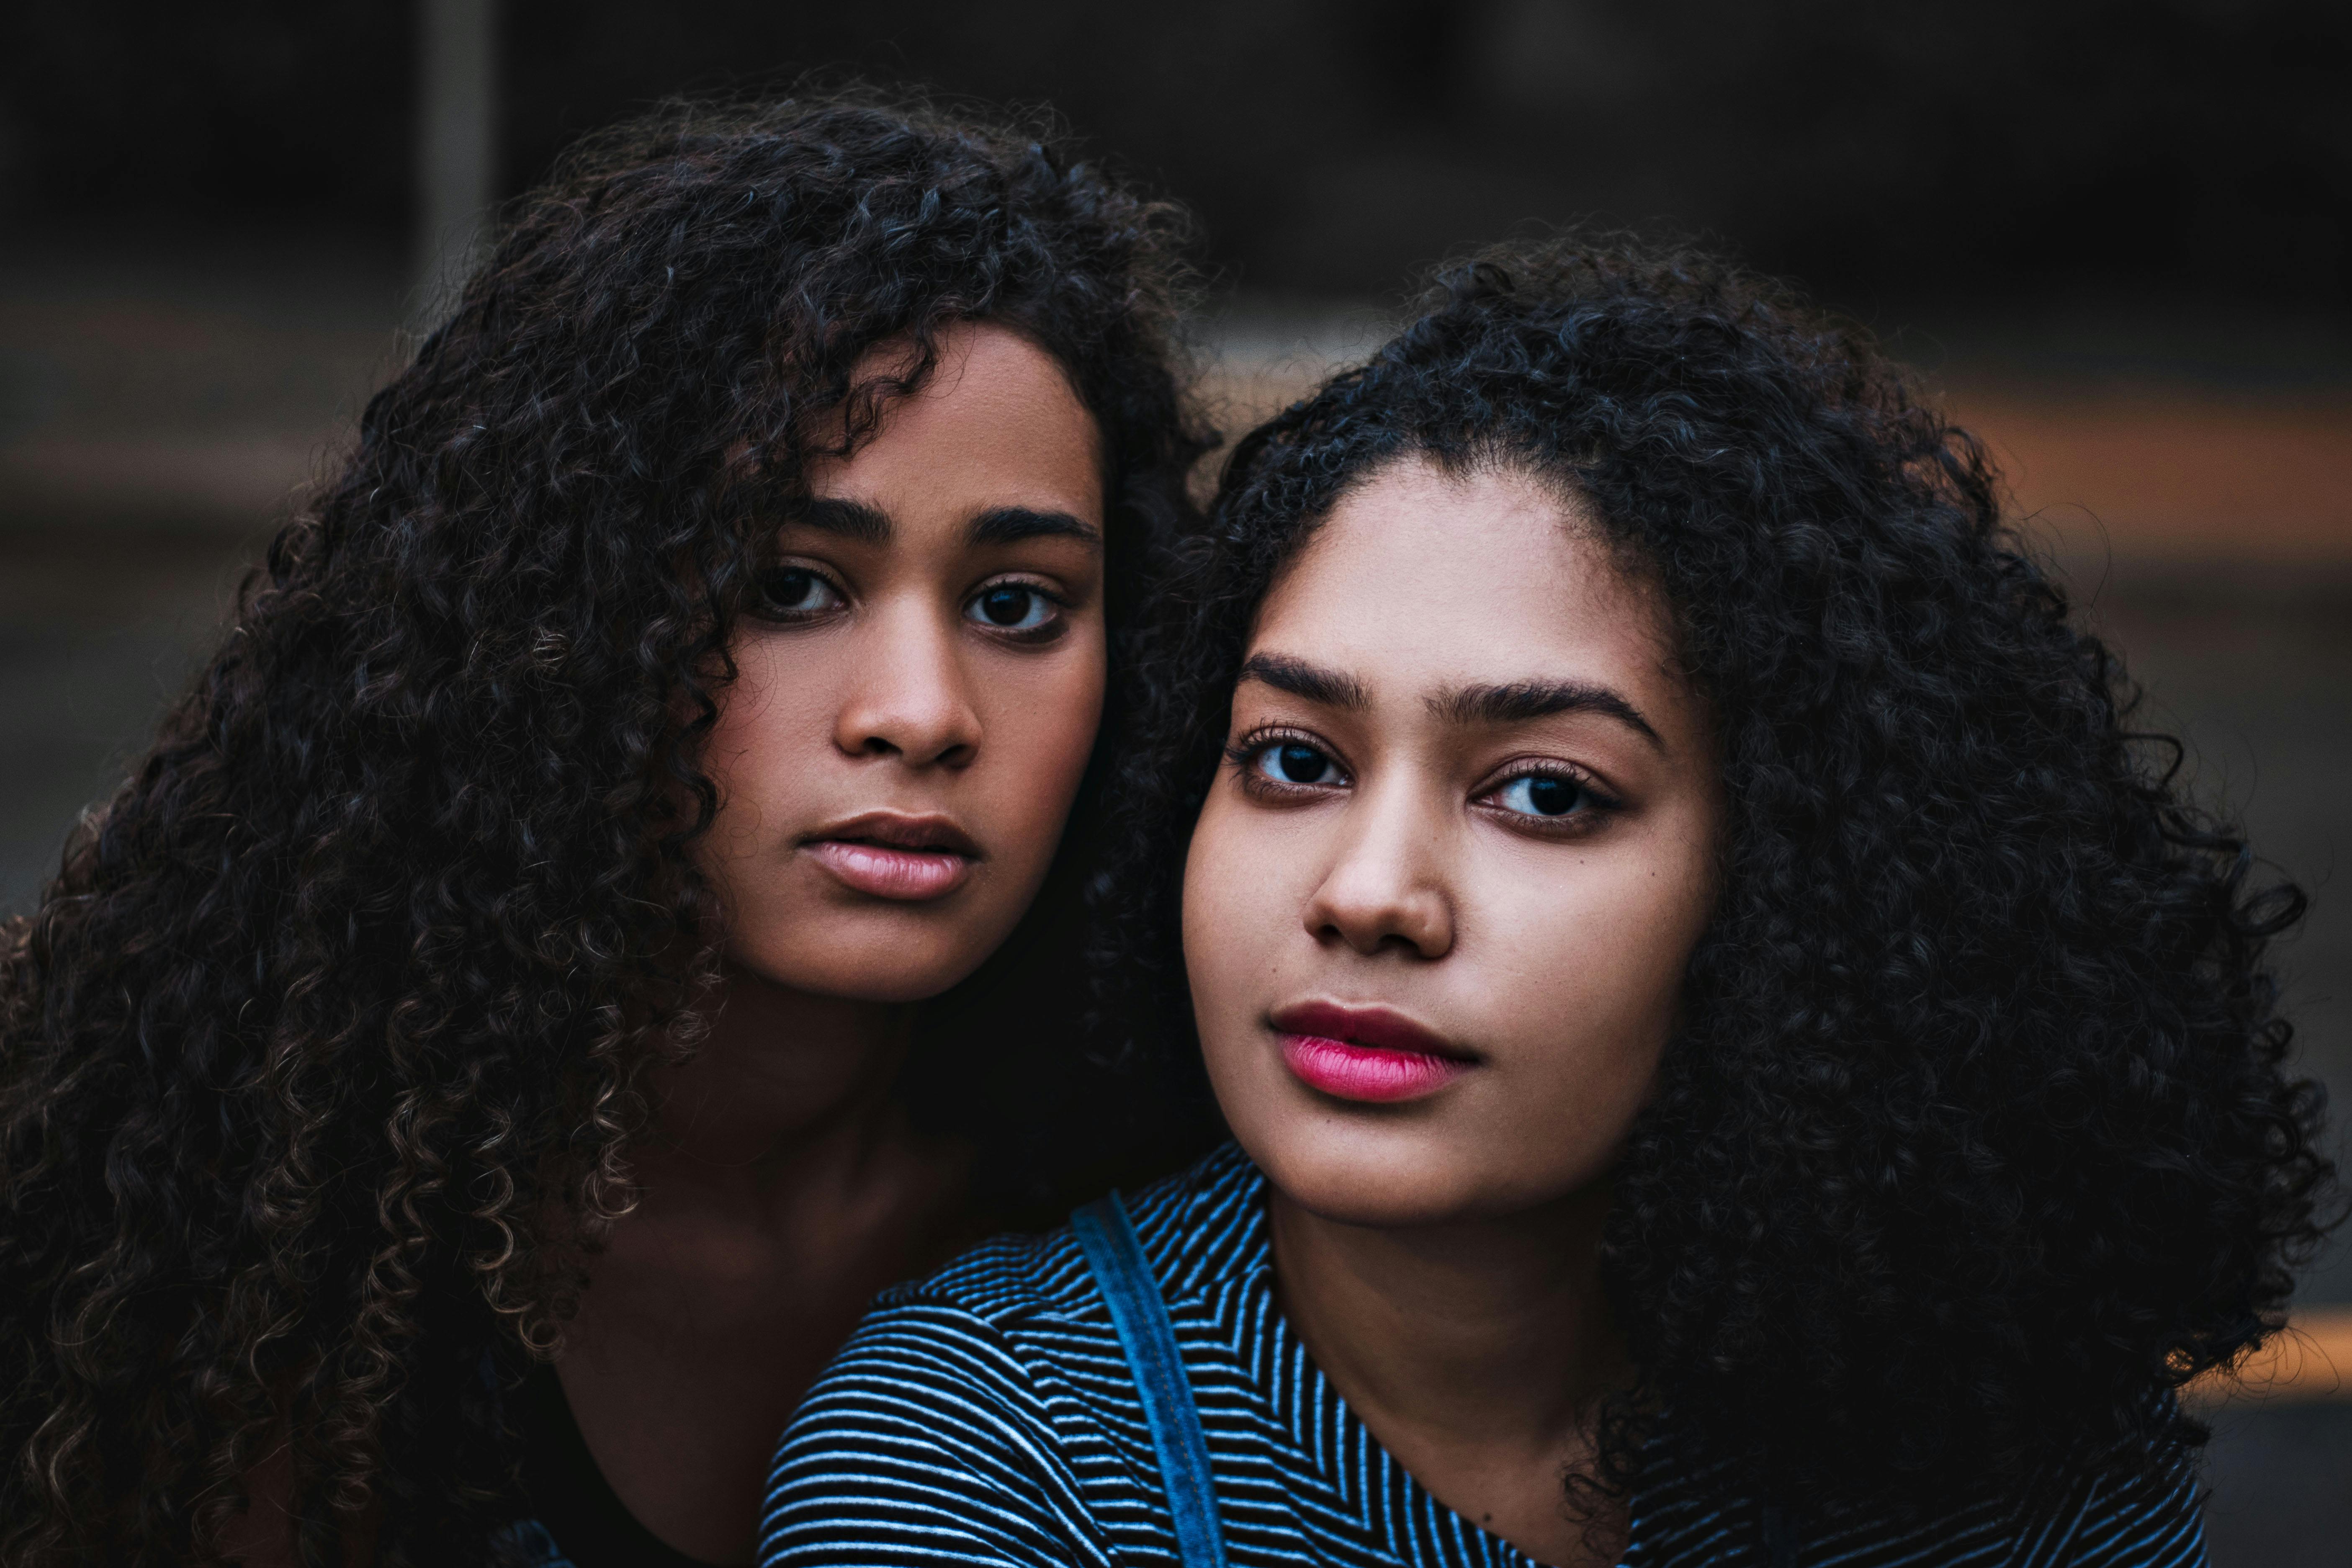 Two sisters posing together | Source: Pexels